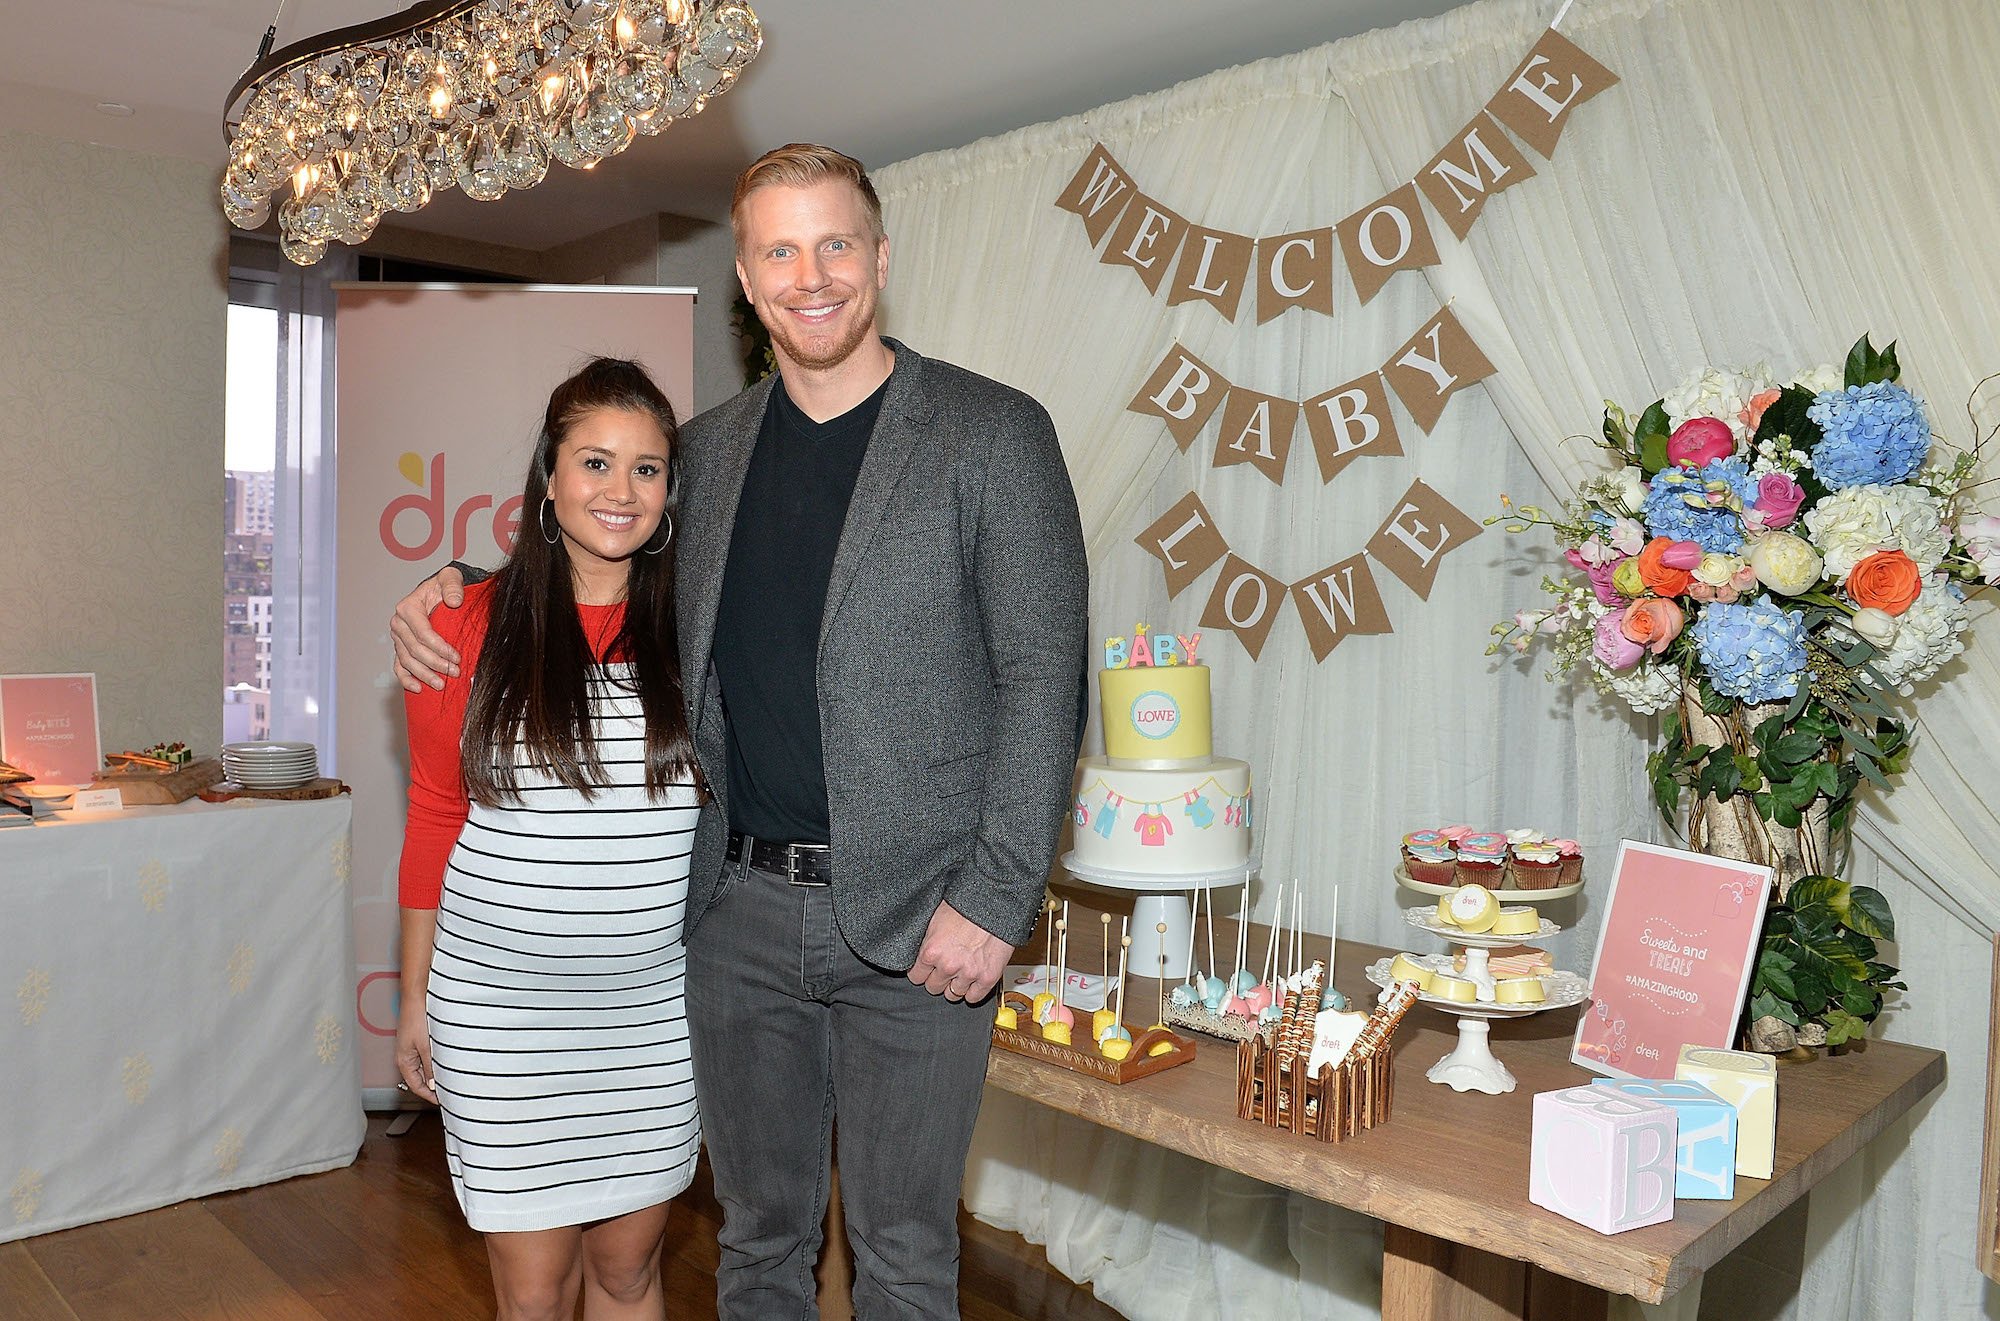 The Bachelor couples still together include Sean and Catherine Lowe — the only Bachelor to stay with his season's winner